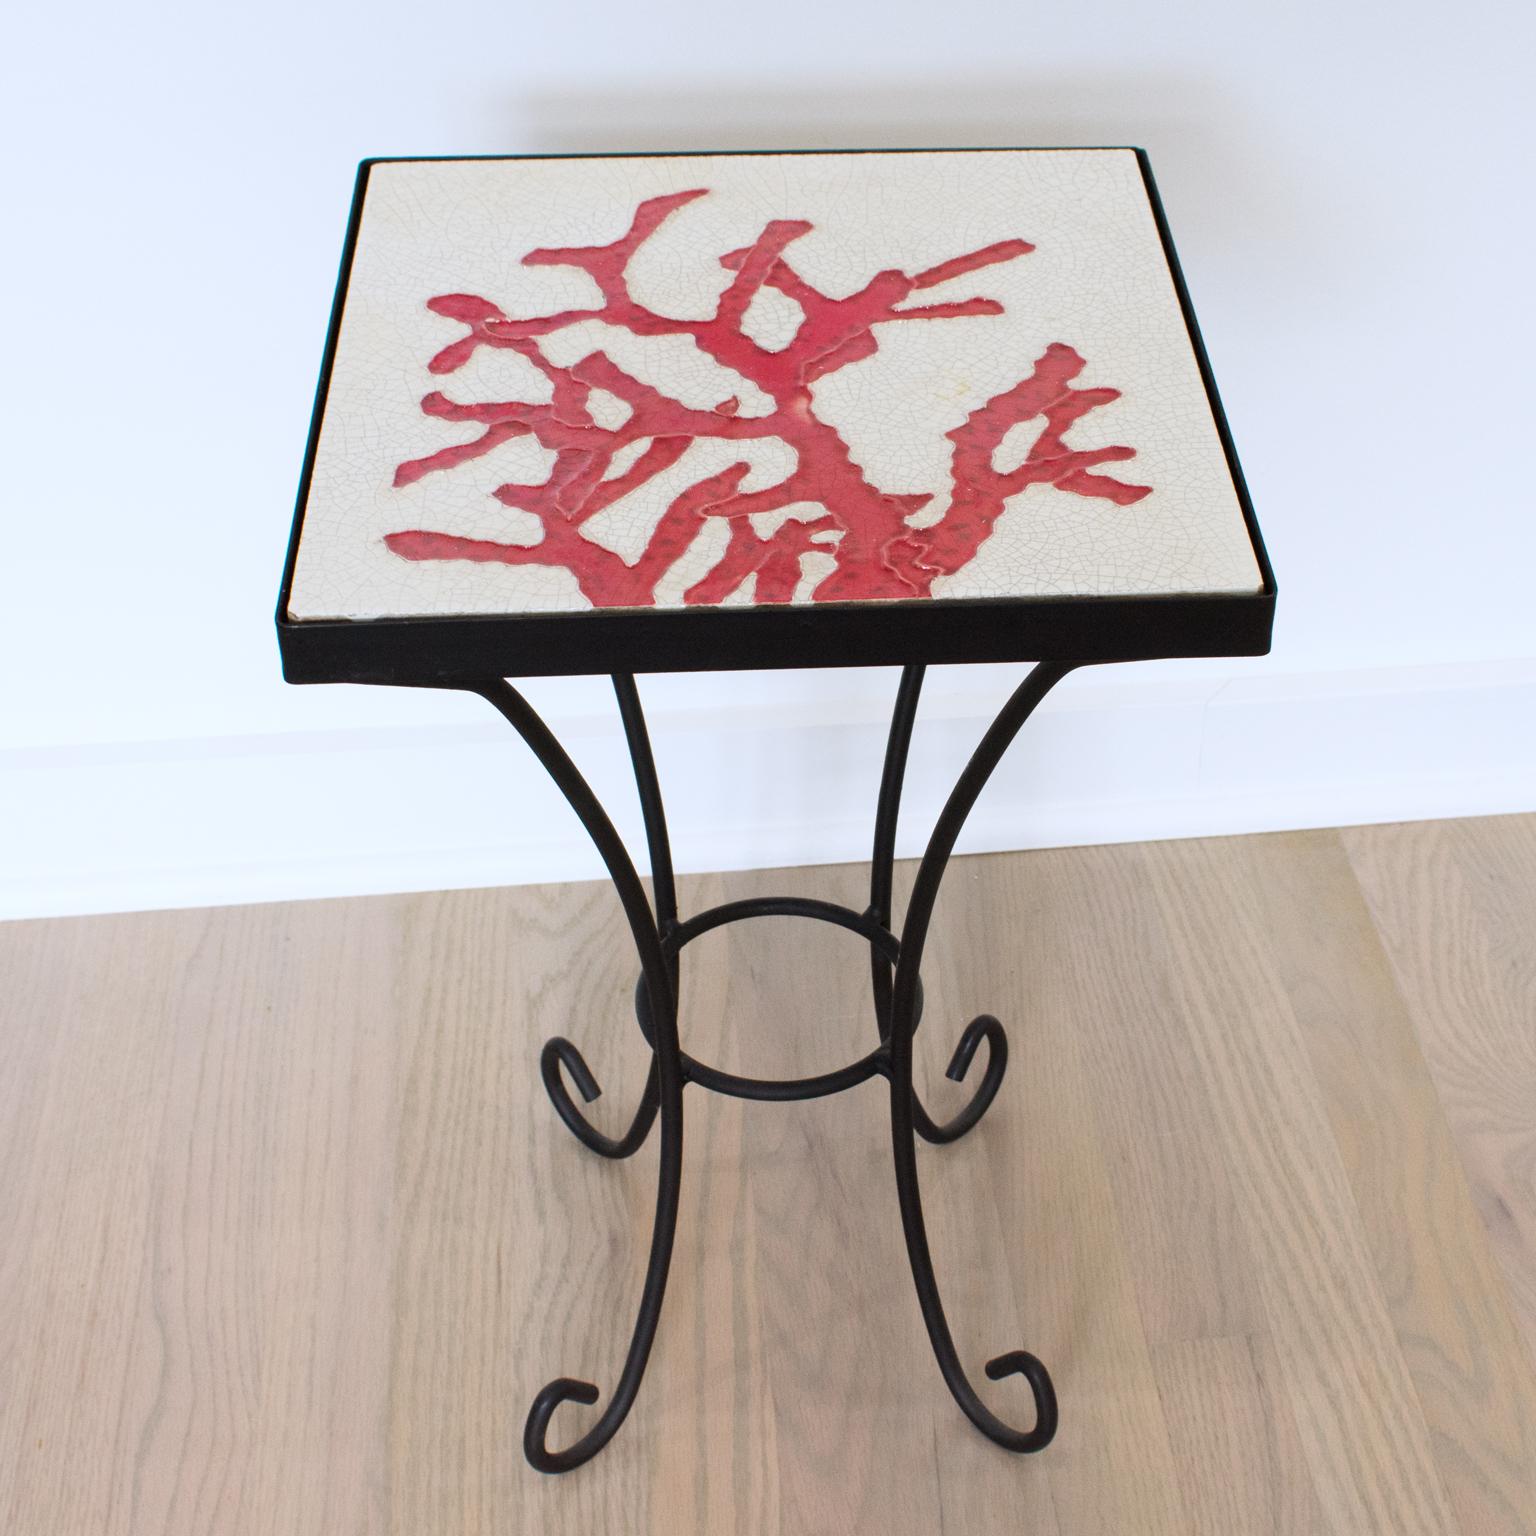 Wrought Iron and Ceramic Tile Side Coffee Table, a pair, 1950s For Sale 9